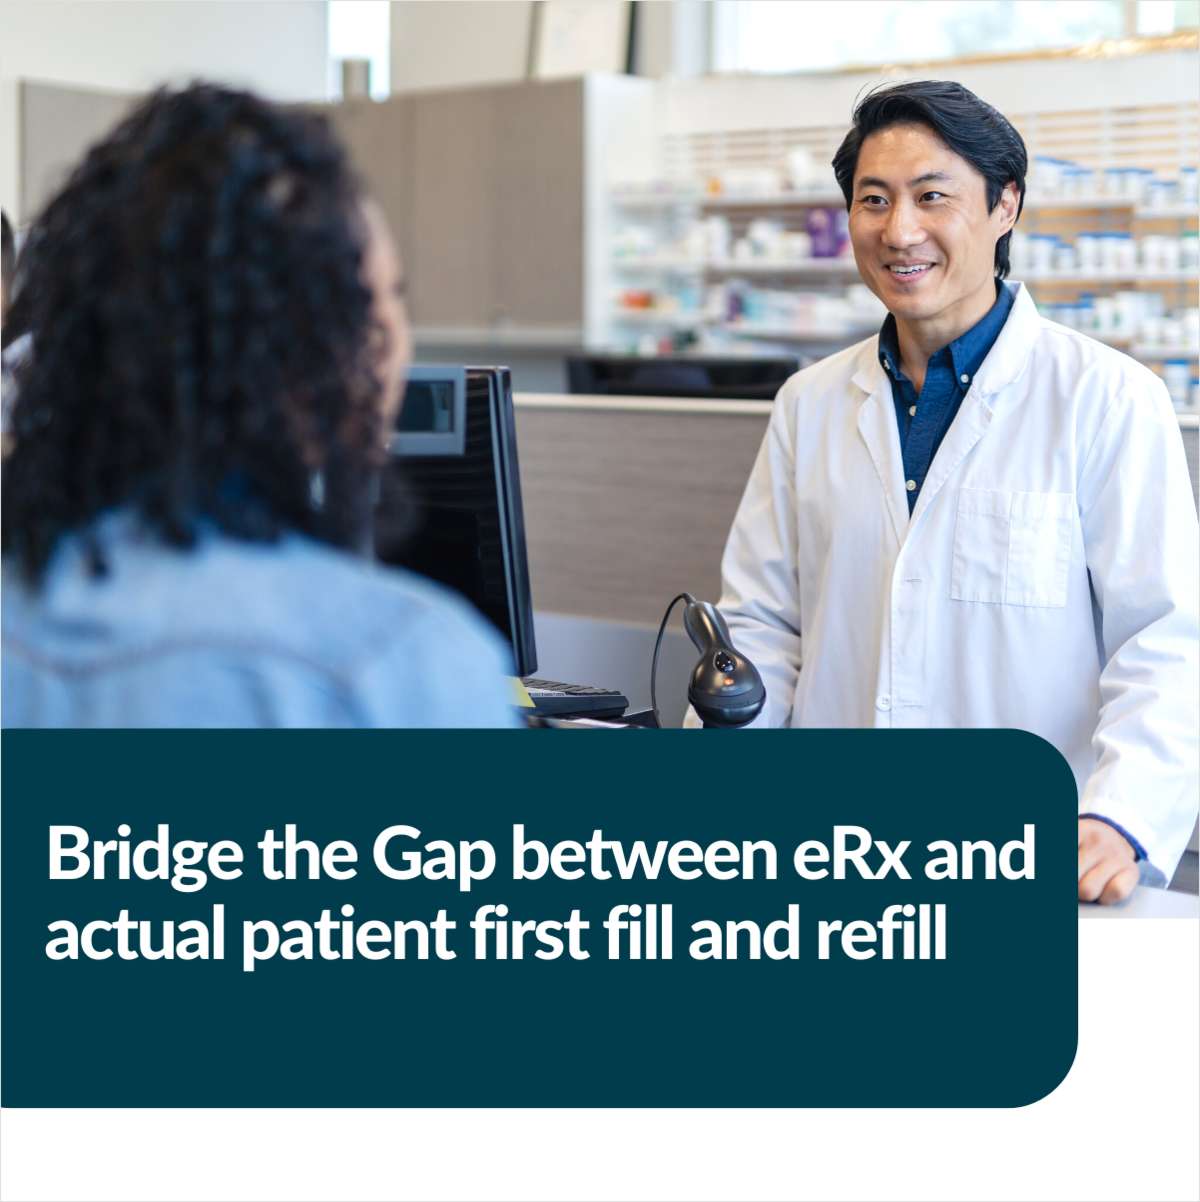 Bridge the gap between eRx and actual patient first fill and refill